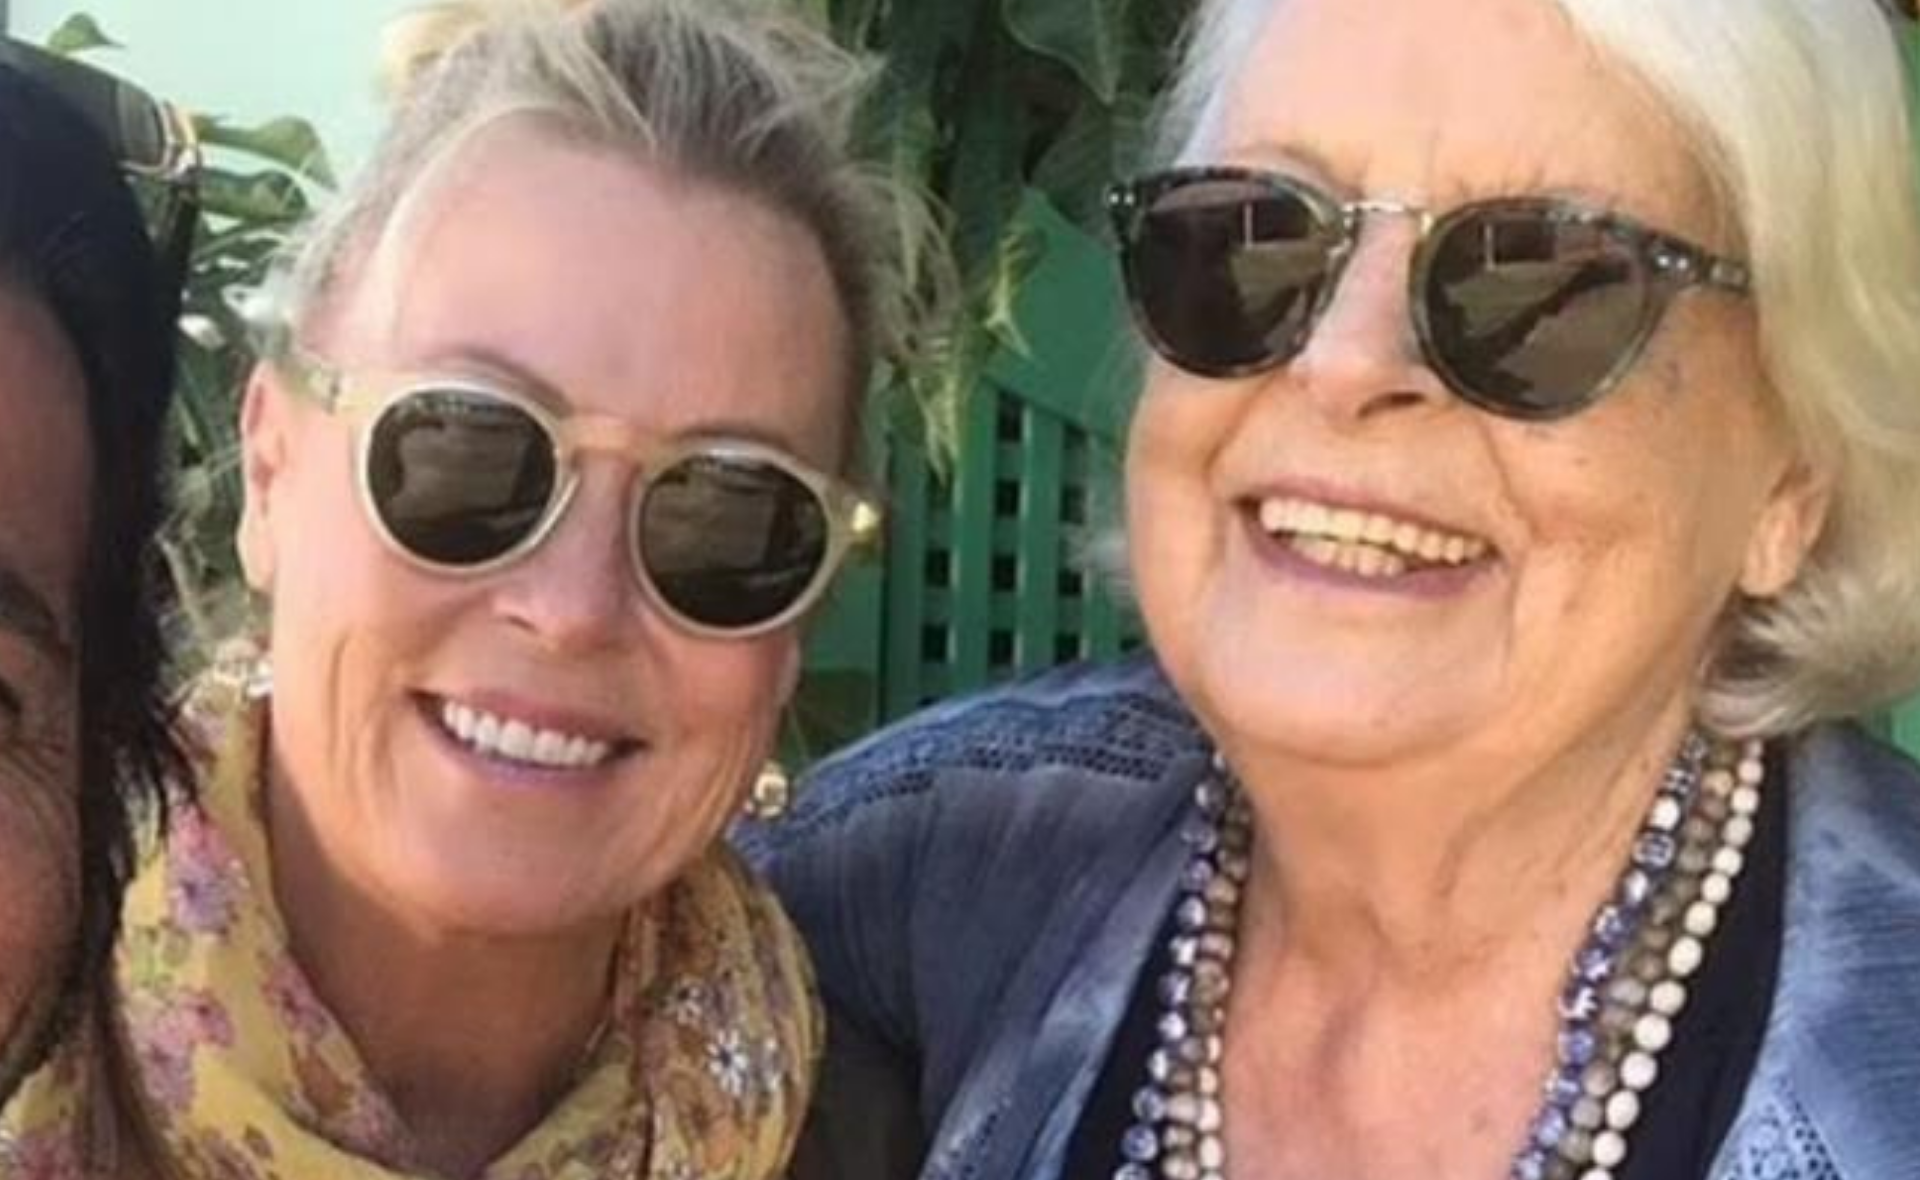 Less than two years after losing daughter Jaimi, Lisa Curry’s beloved mum has passed away